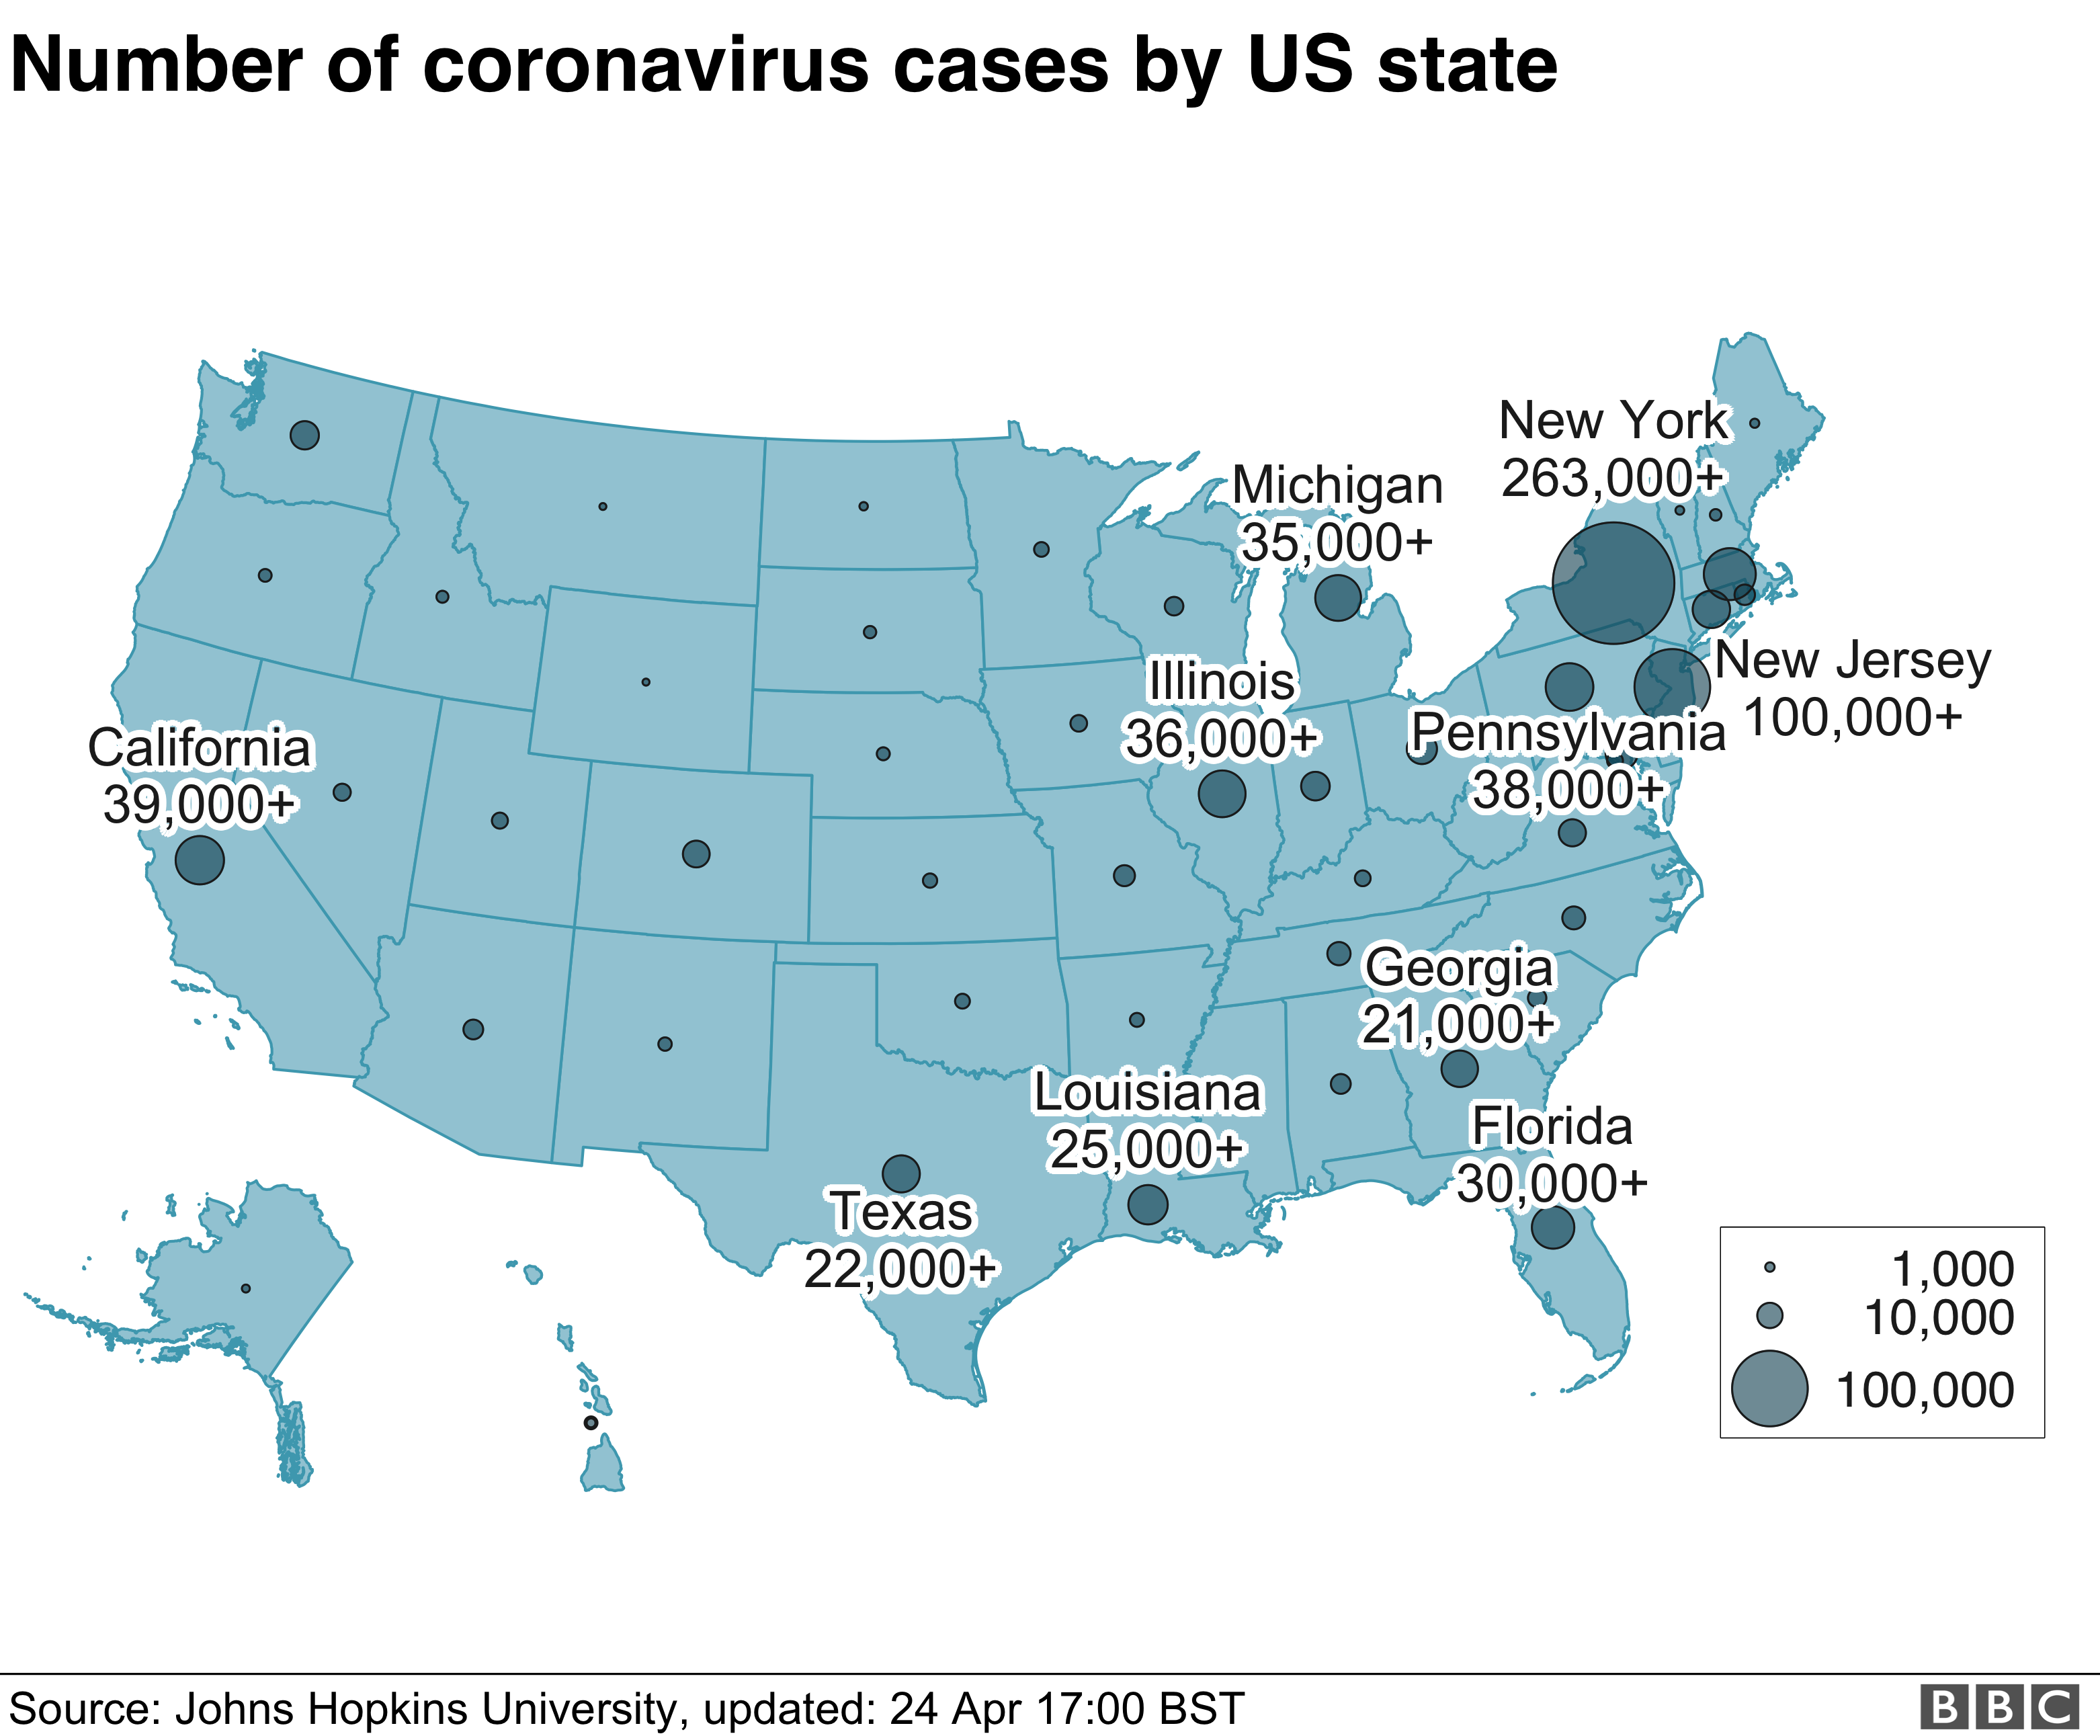 Map showing cases across the United States. New York has many more confirmed cases than any other state